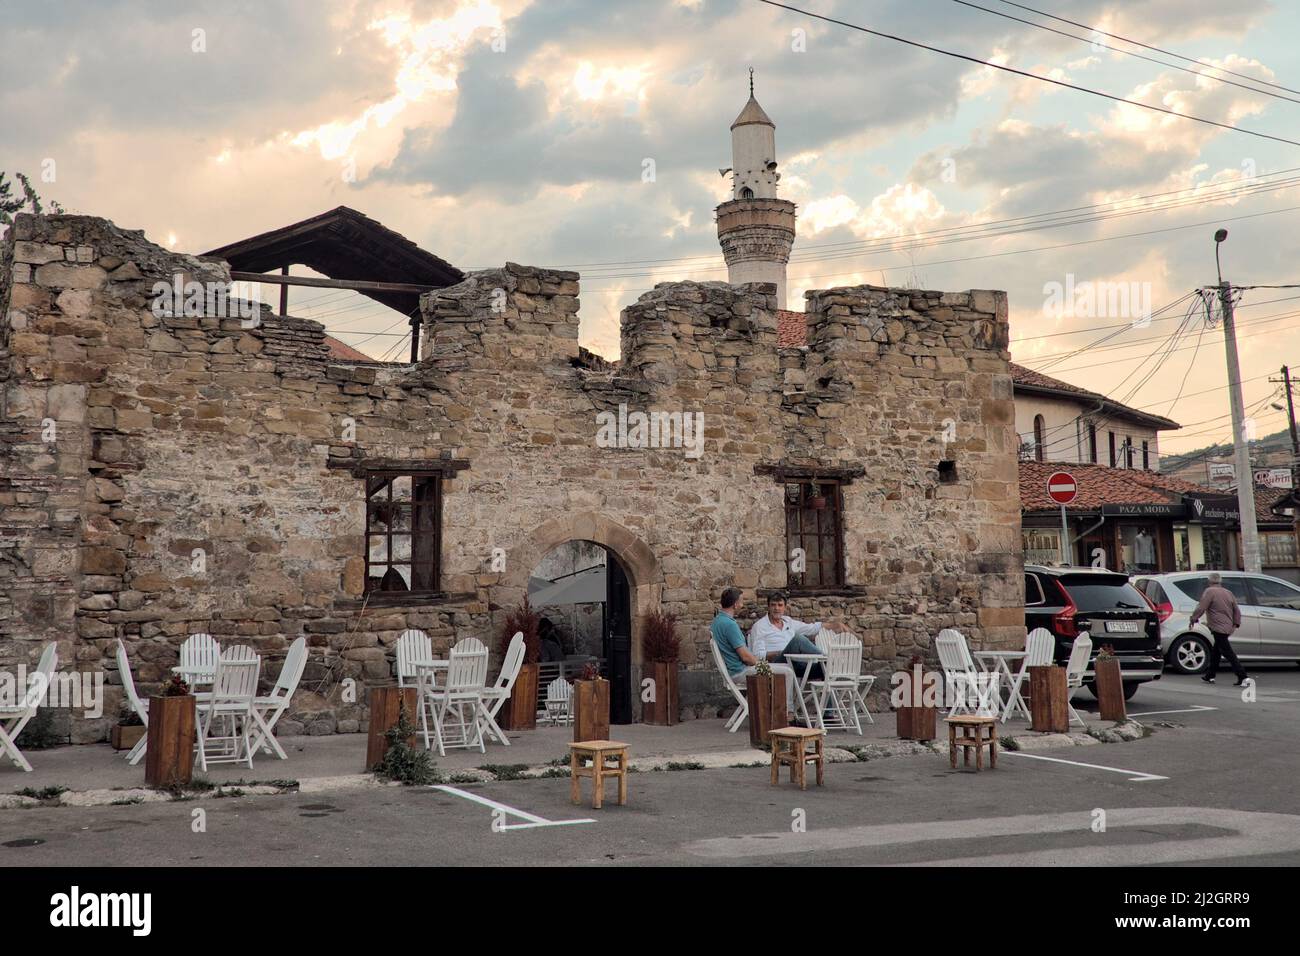 NOVI PAZAR, SERBIA - AUGUST 12, 2017: clients sitting on sidewalk of a coffee bar in the old turkish quarter; on background minaret of a mosque agains Stock Photo